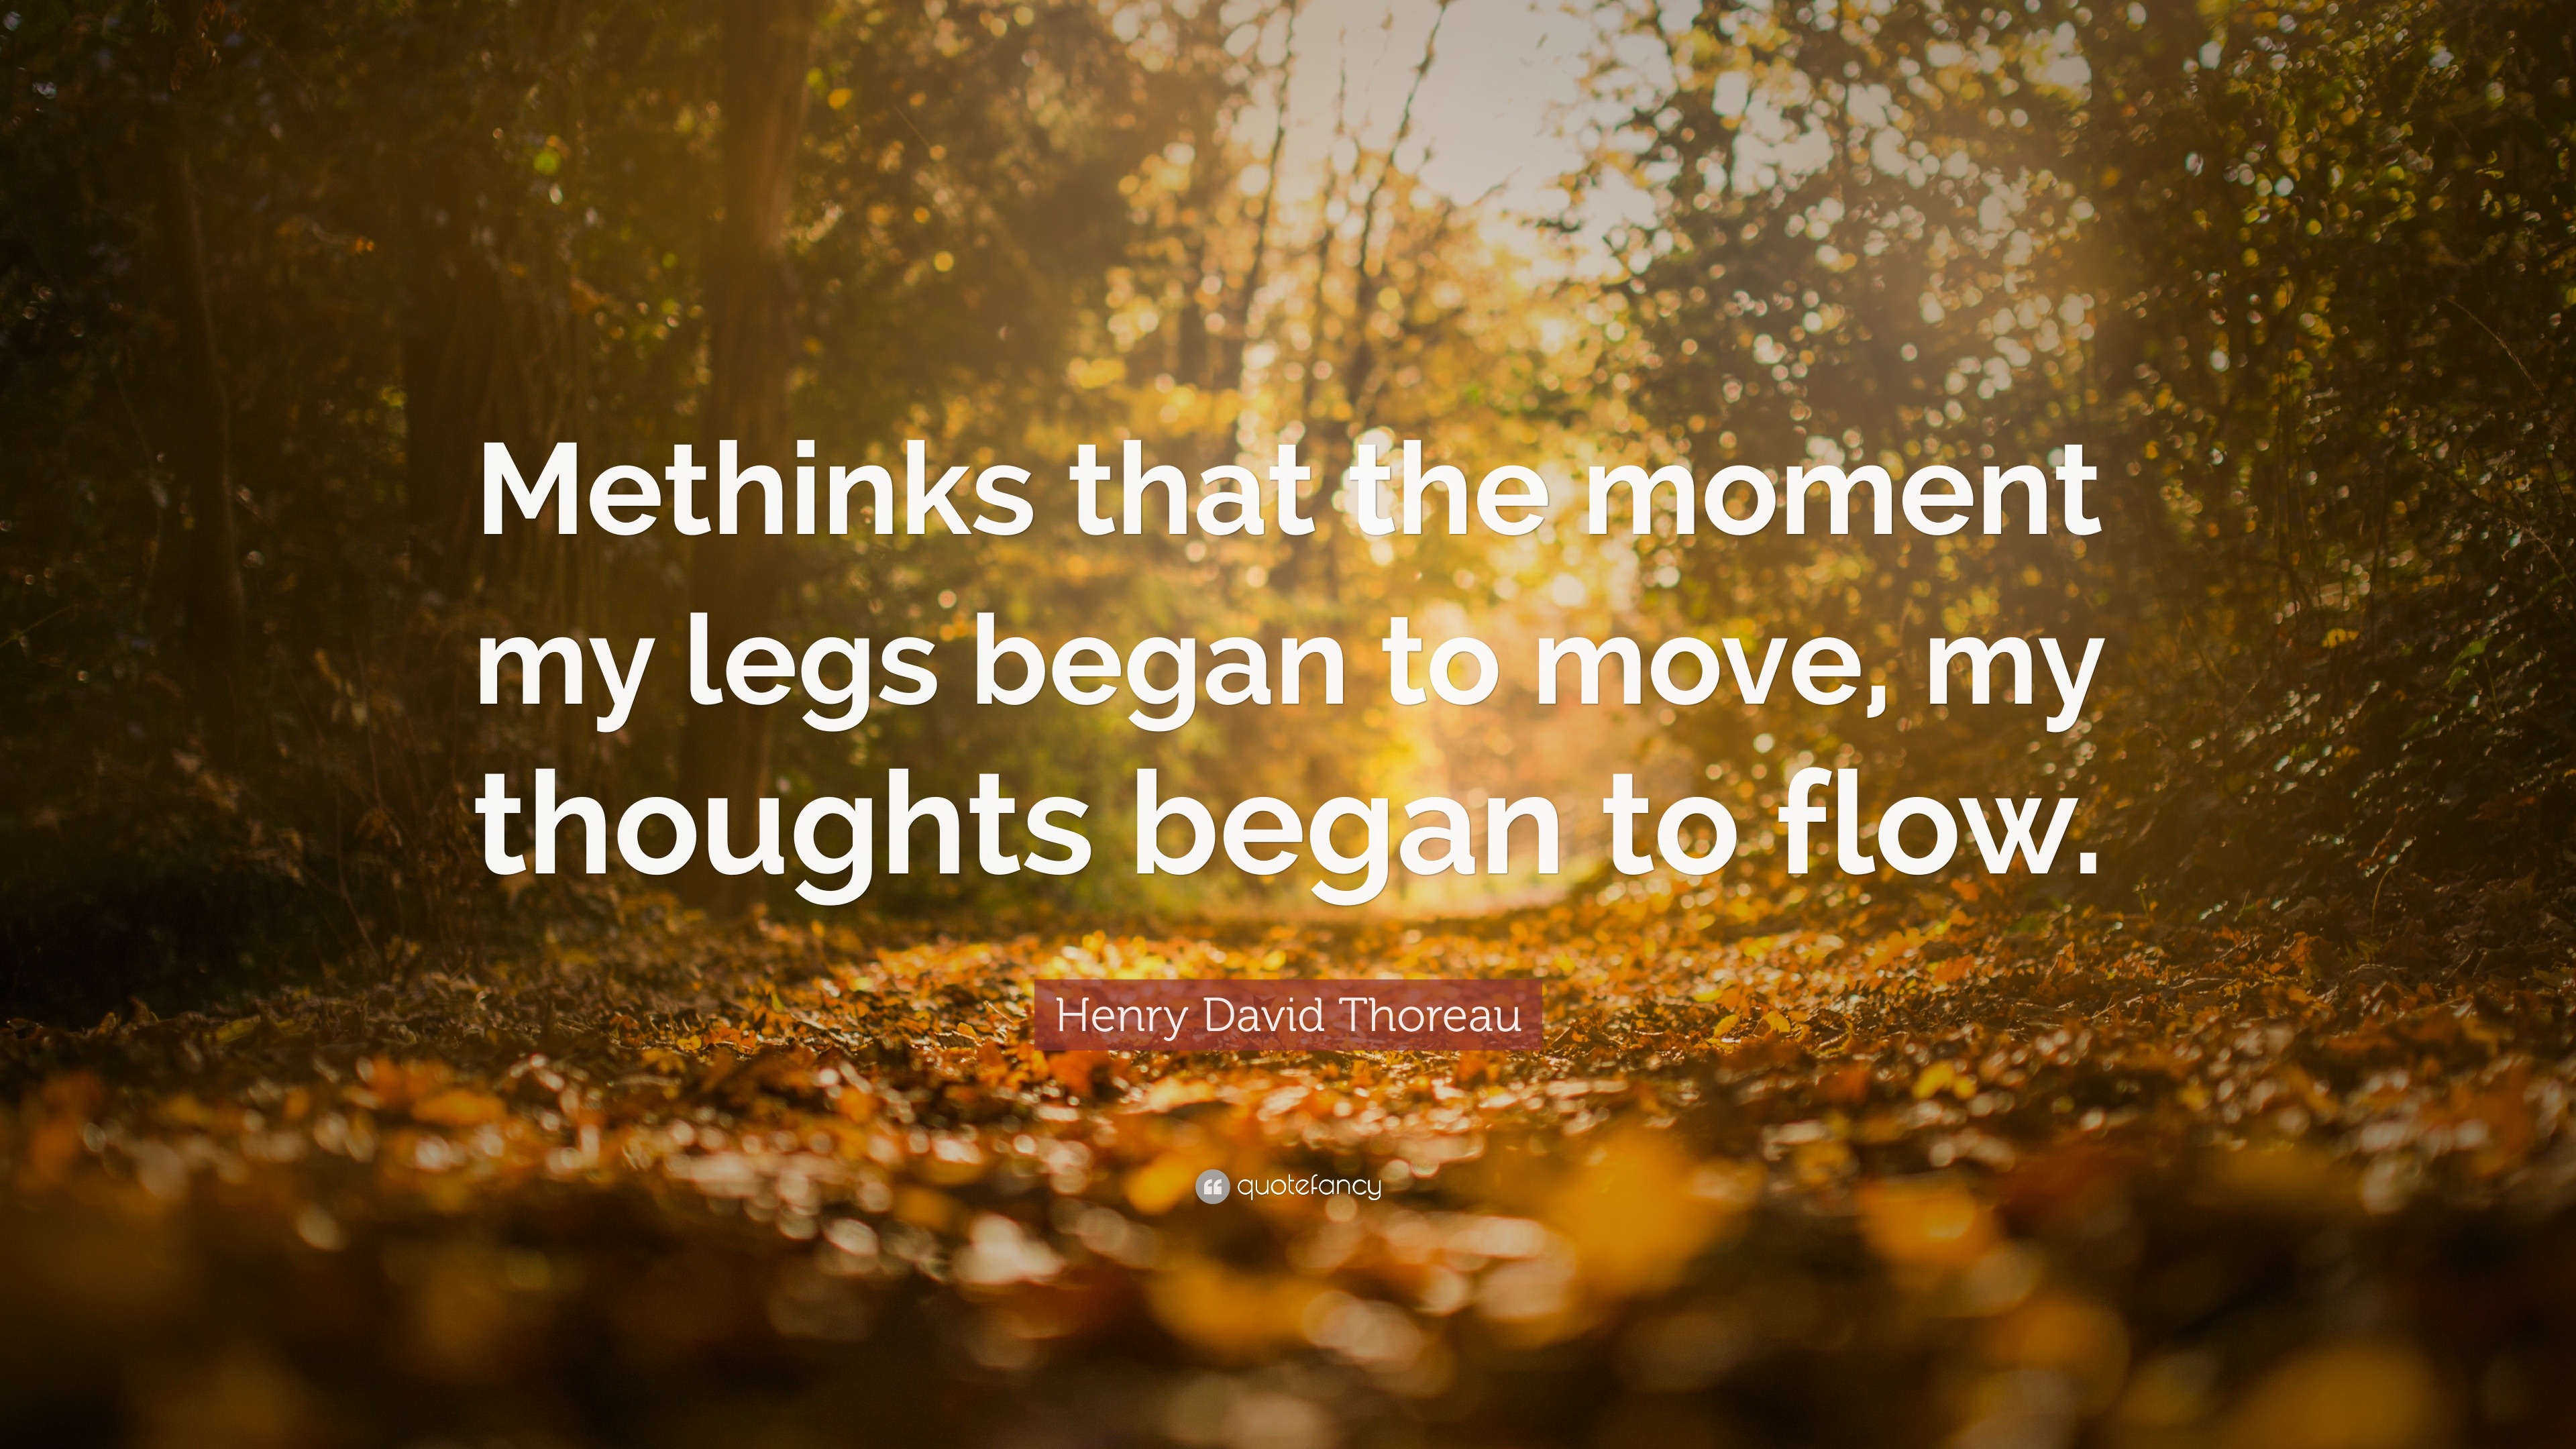 Henry David Thoreau Quote: “Methinks that the moment my legs began to ...